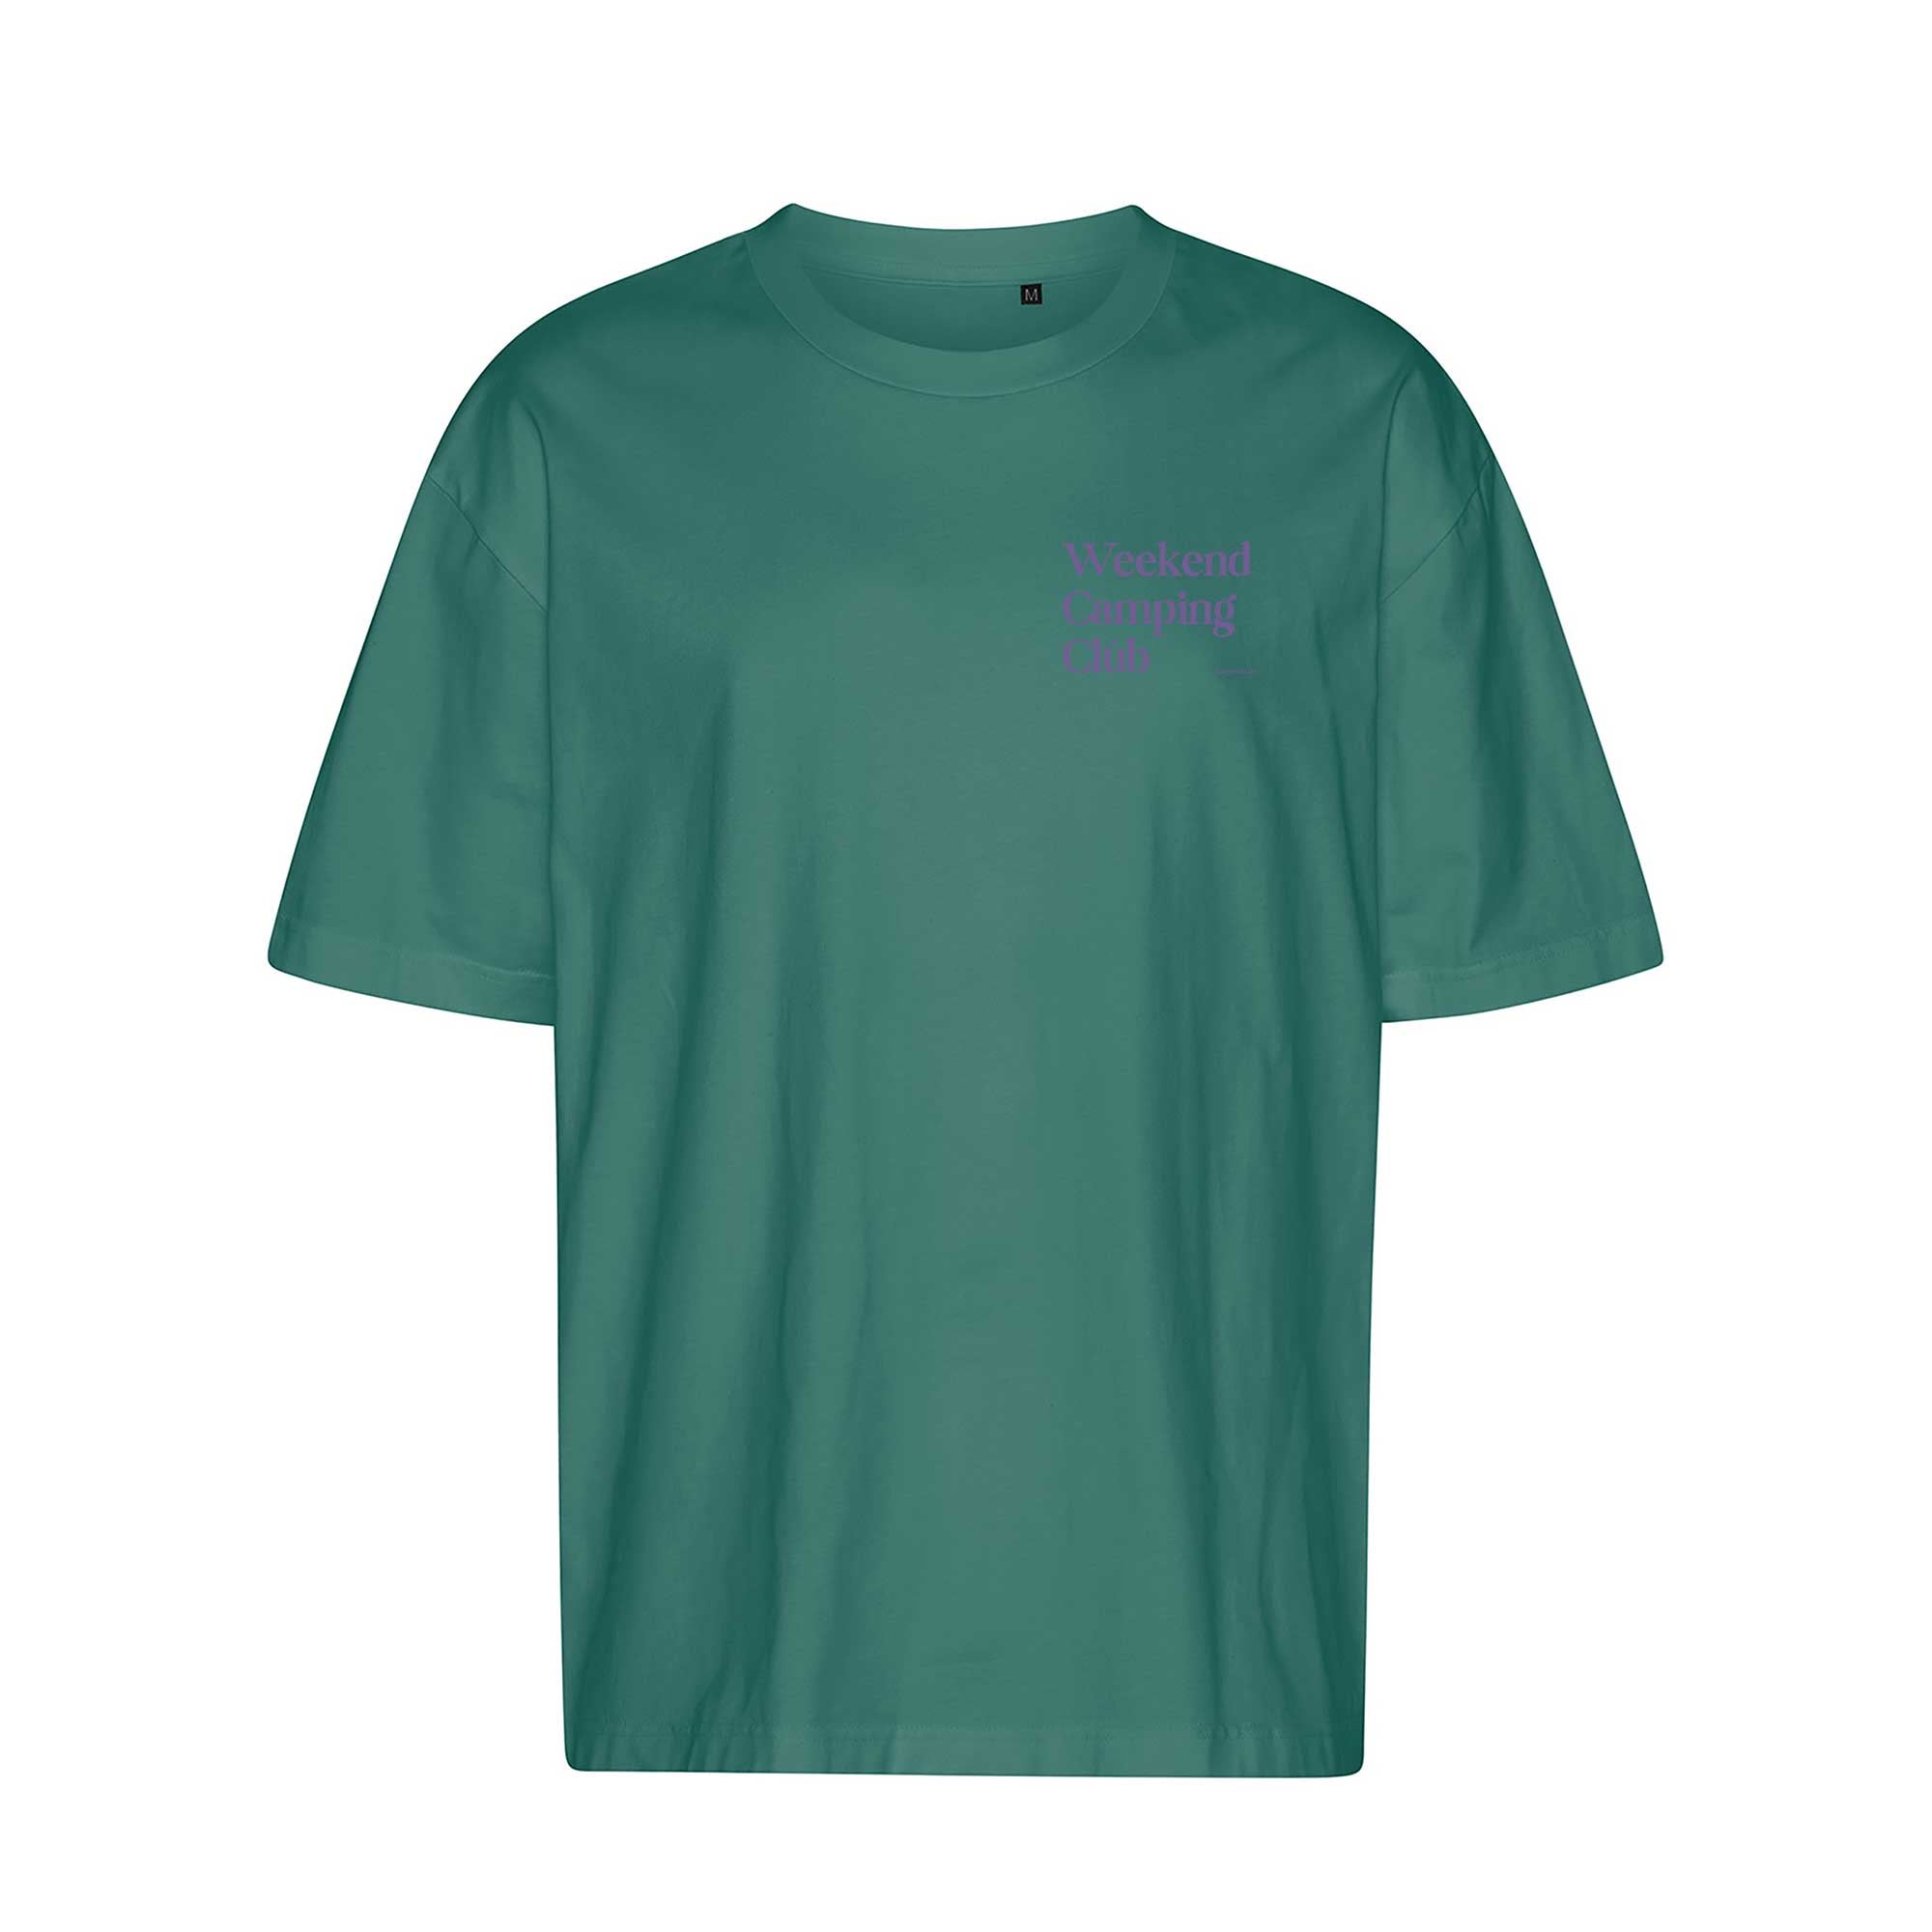 Oversized T-Shirt TEAL "Weekend Camping Club"